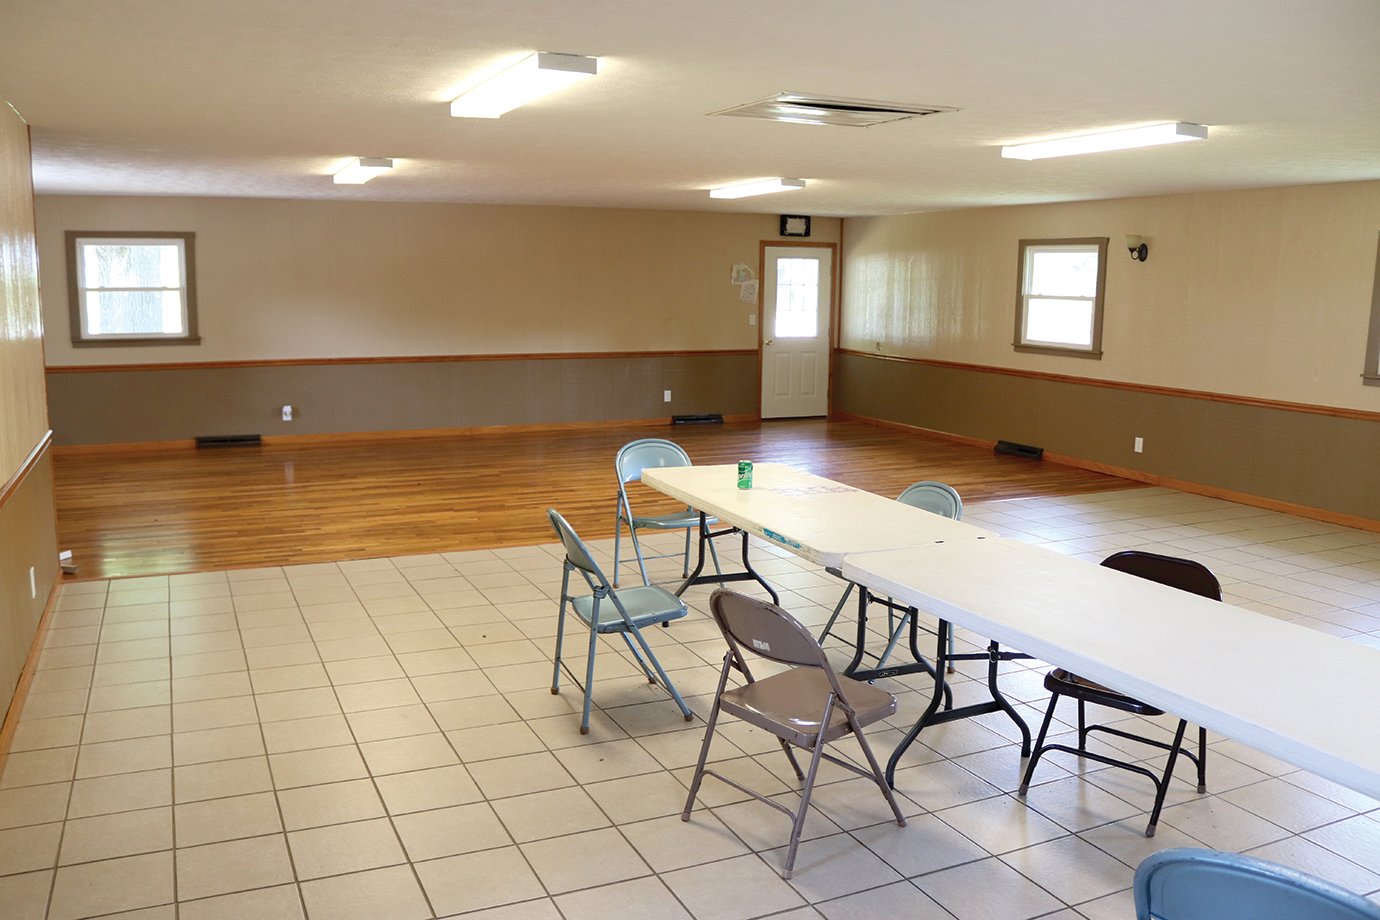 The ground floor of the Darlington Conservation Club once again awaits activity from members of the community, organizations and clubs thanks to Bart Maxwell of Maxwell Trucking & Excavation and other various donations.